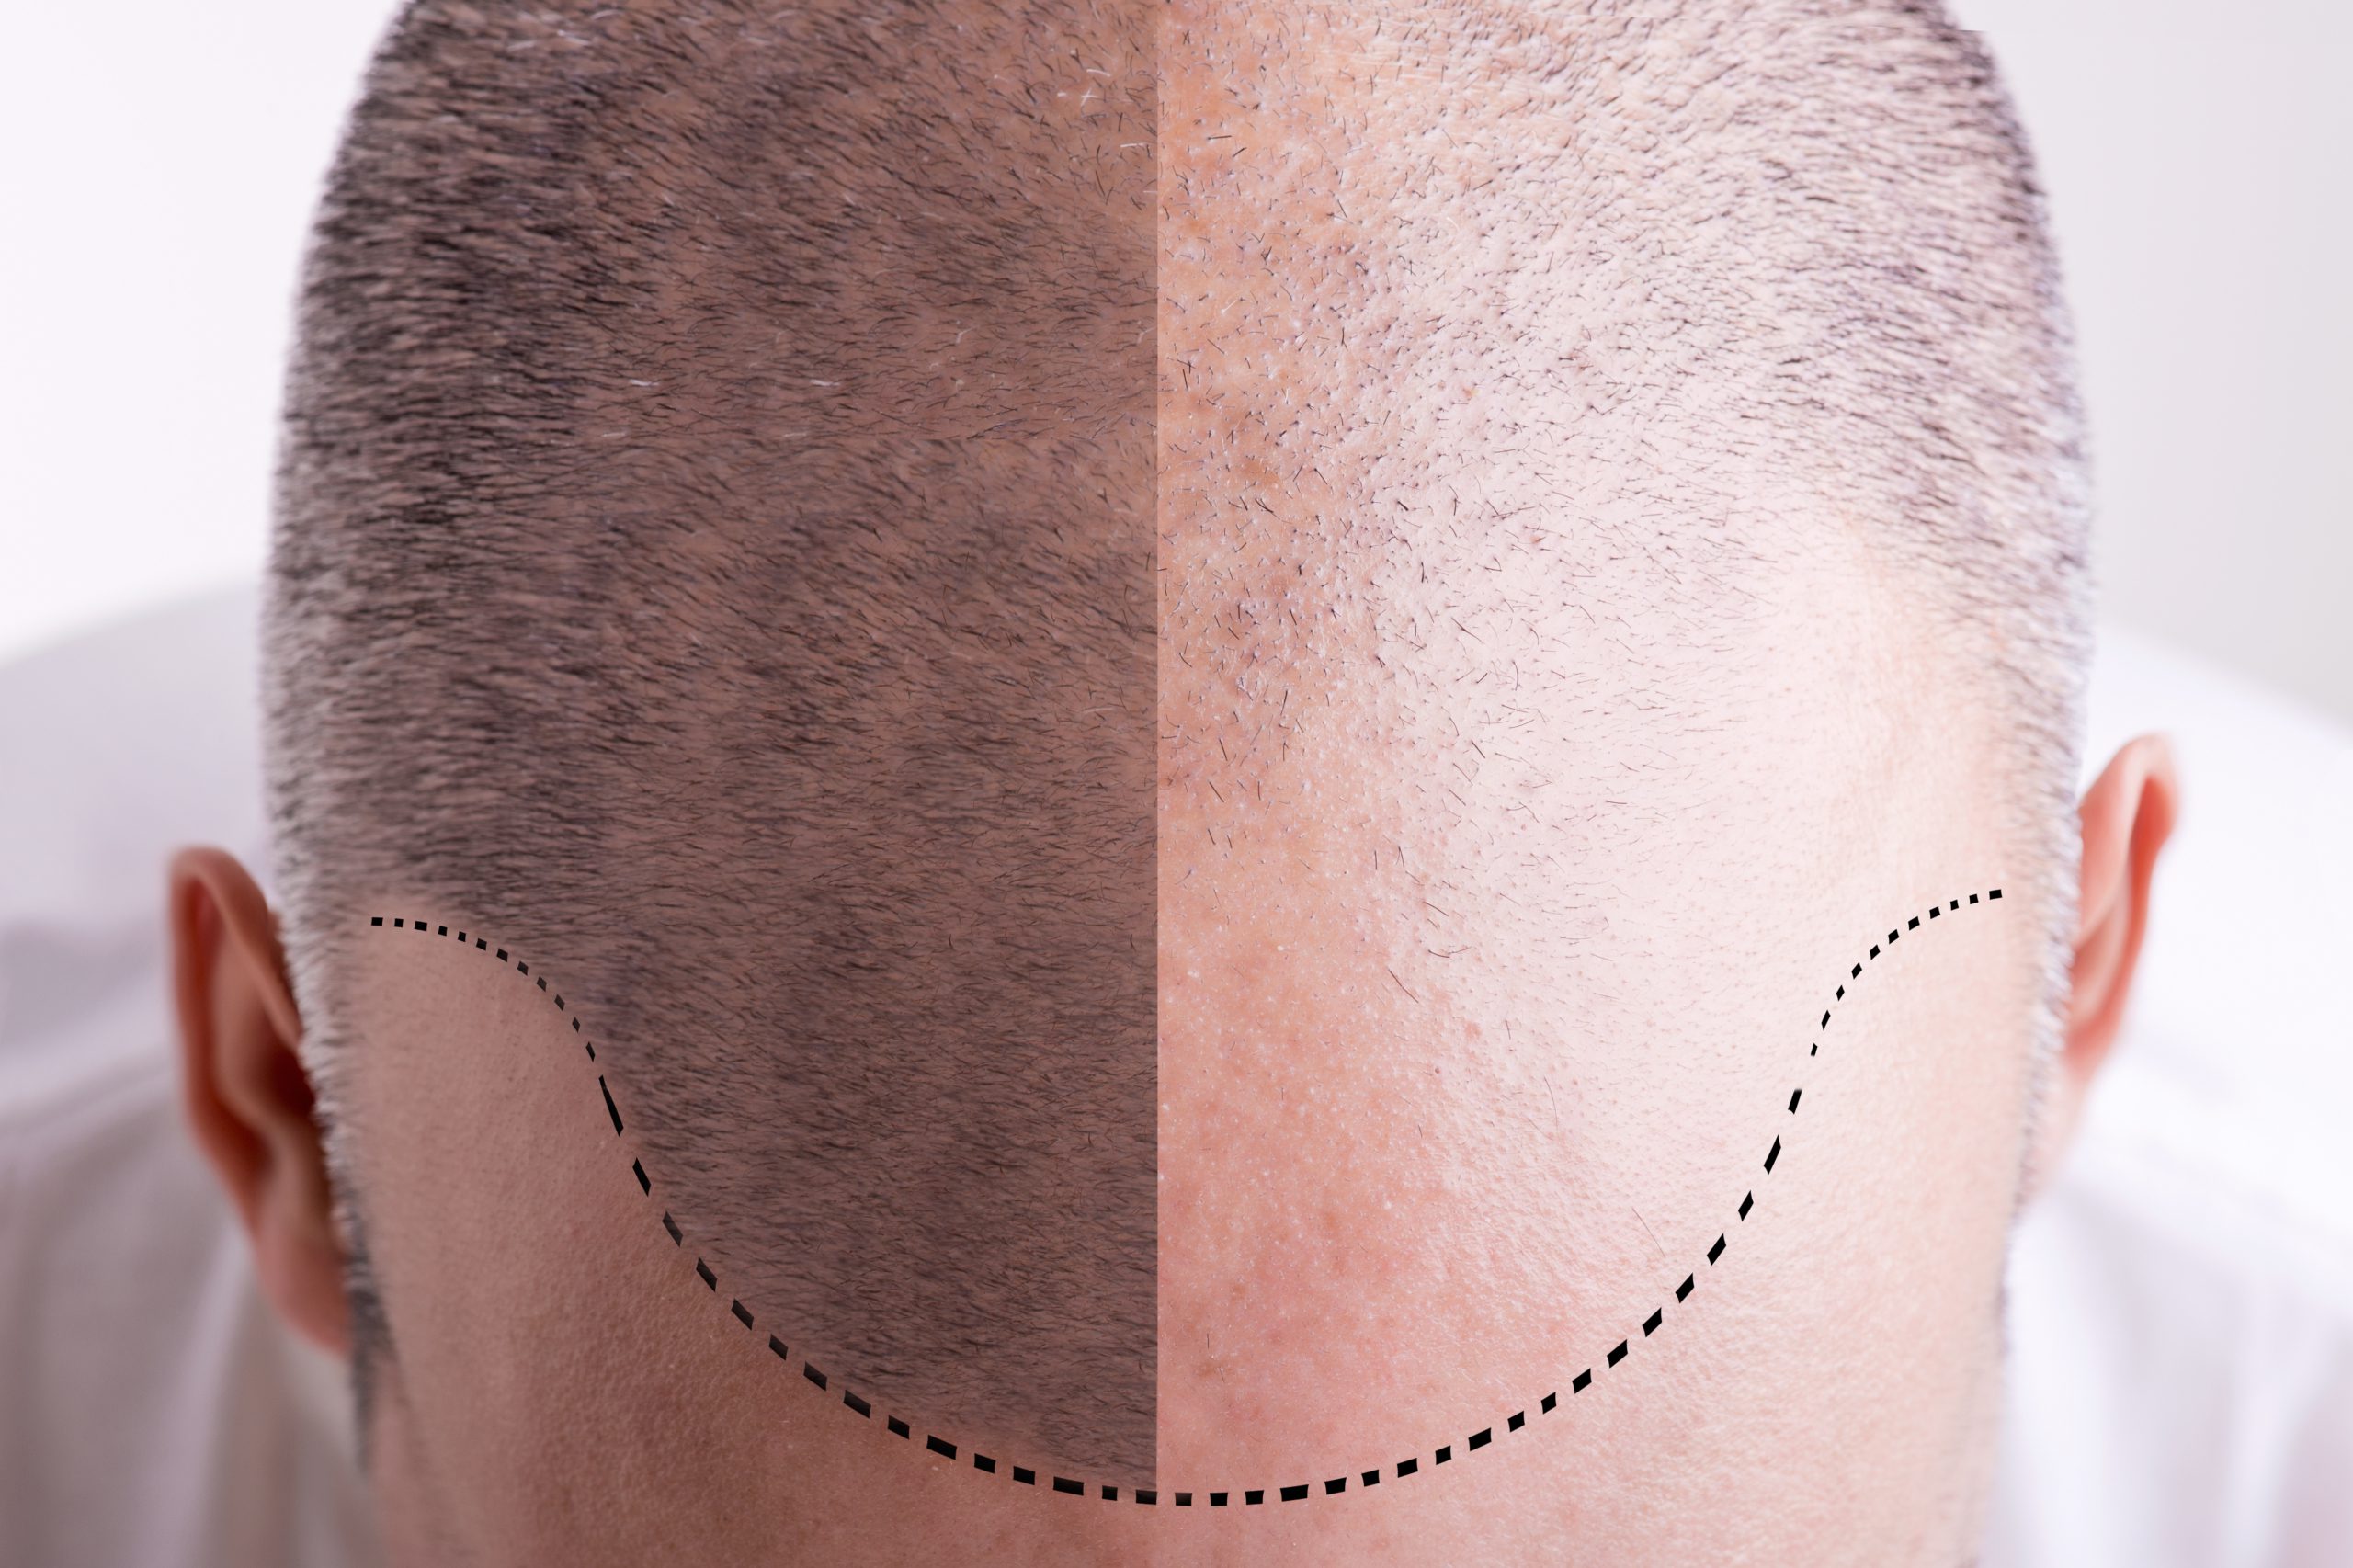 What makes a good candidate for Hair Transplant surgery? - Ape to Gentleman